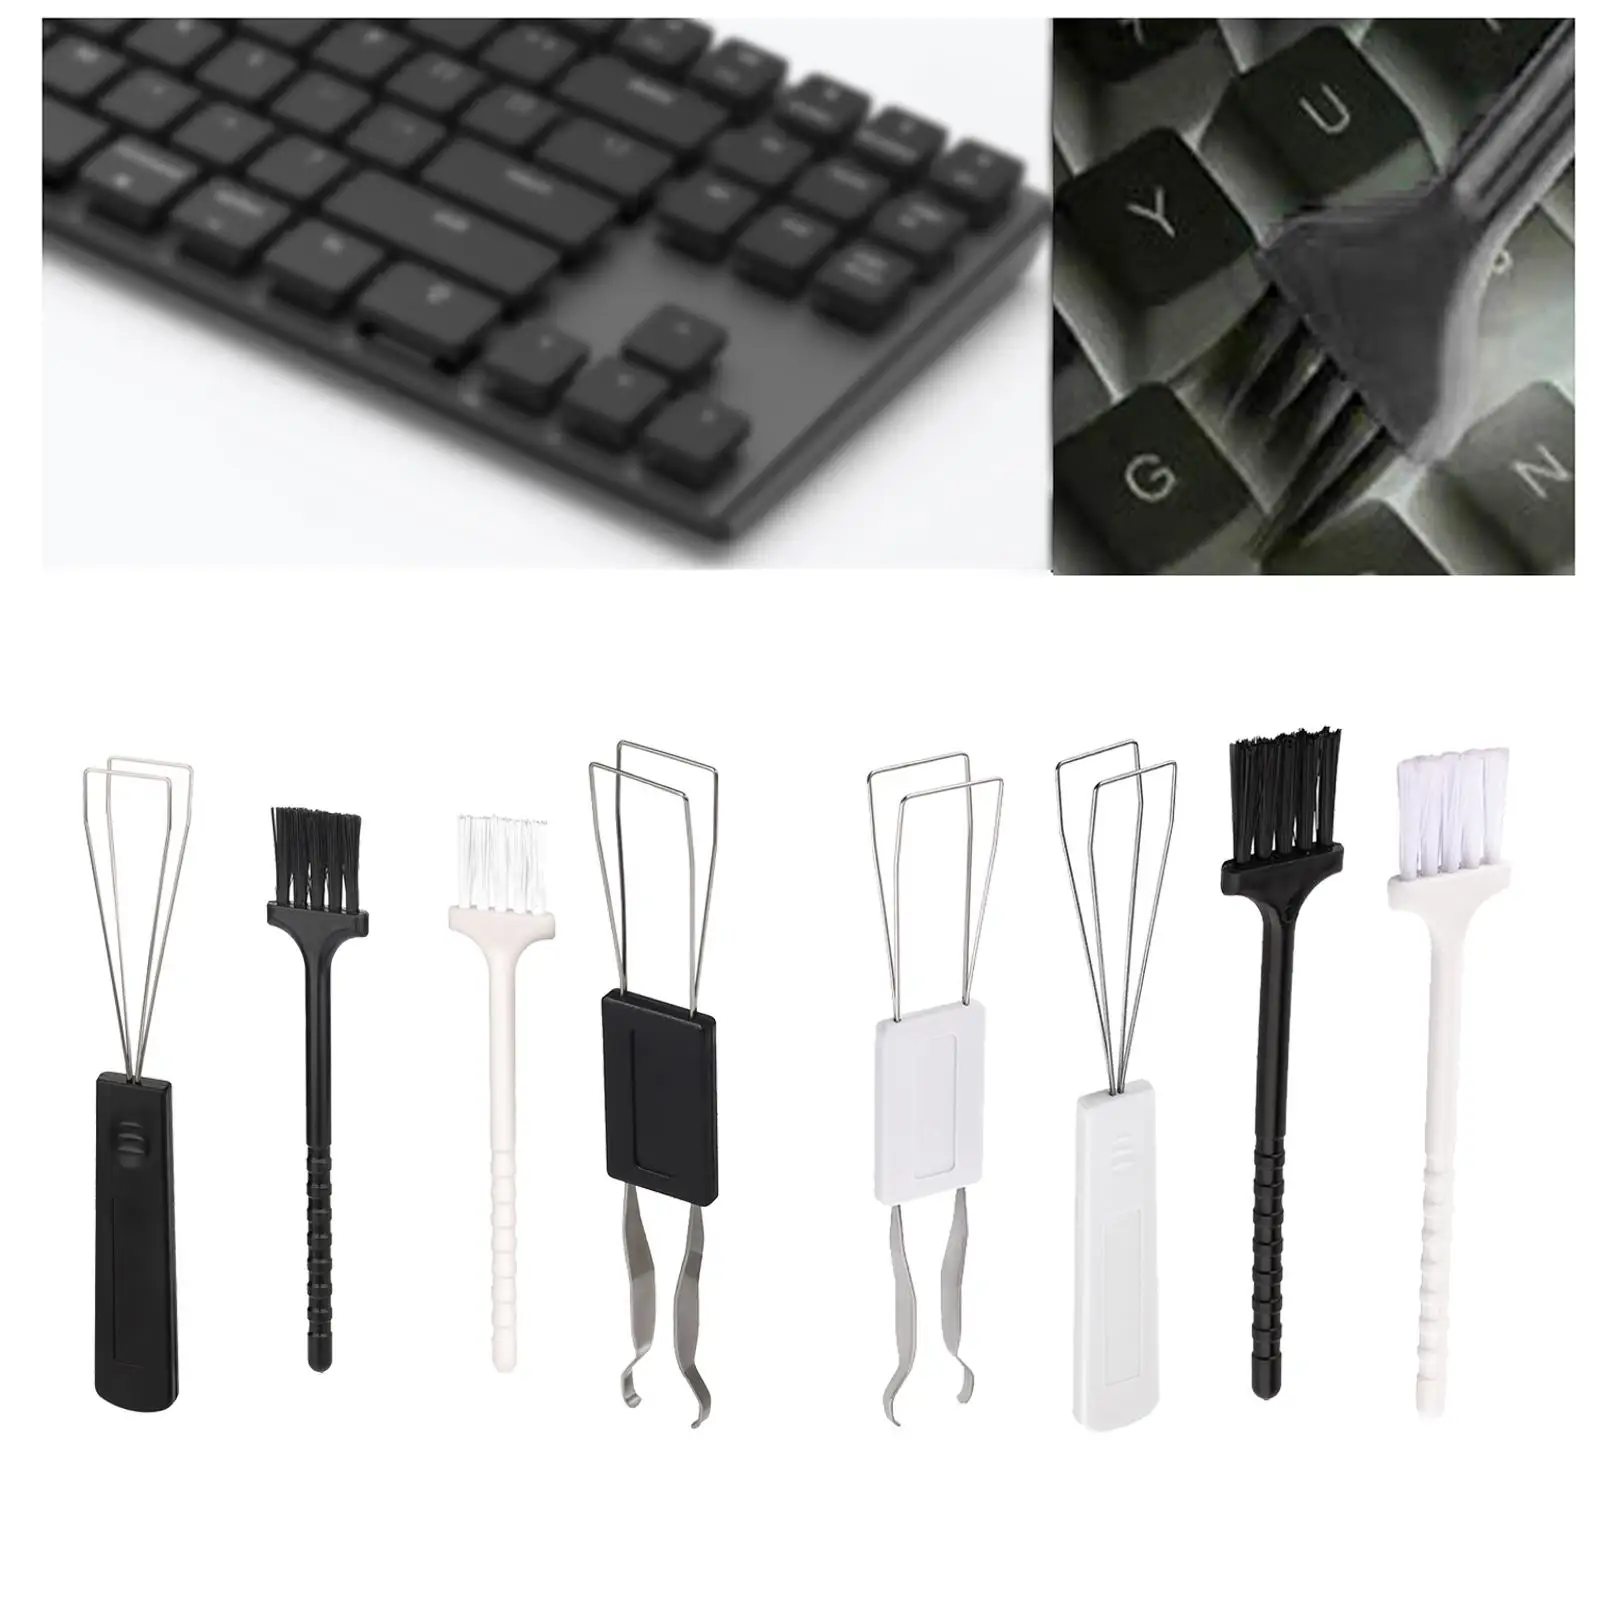 Mechanical Keyboard Brush Set Convenient Durable Key Cap Shaft Remover Tool Kit Keycap Pullers for Fans Electronics Radiators